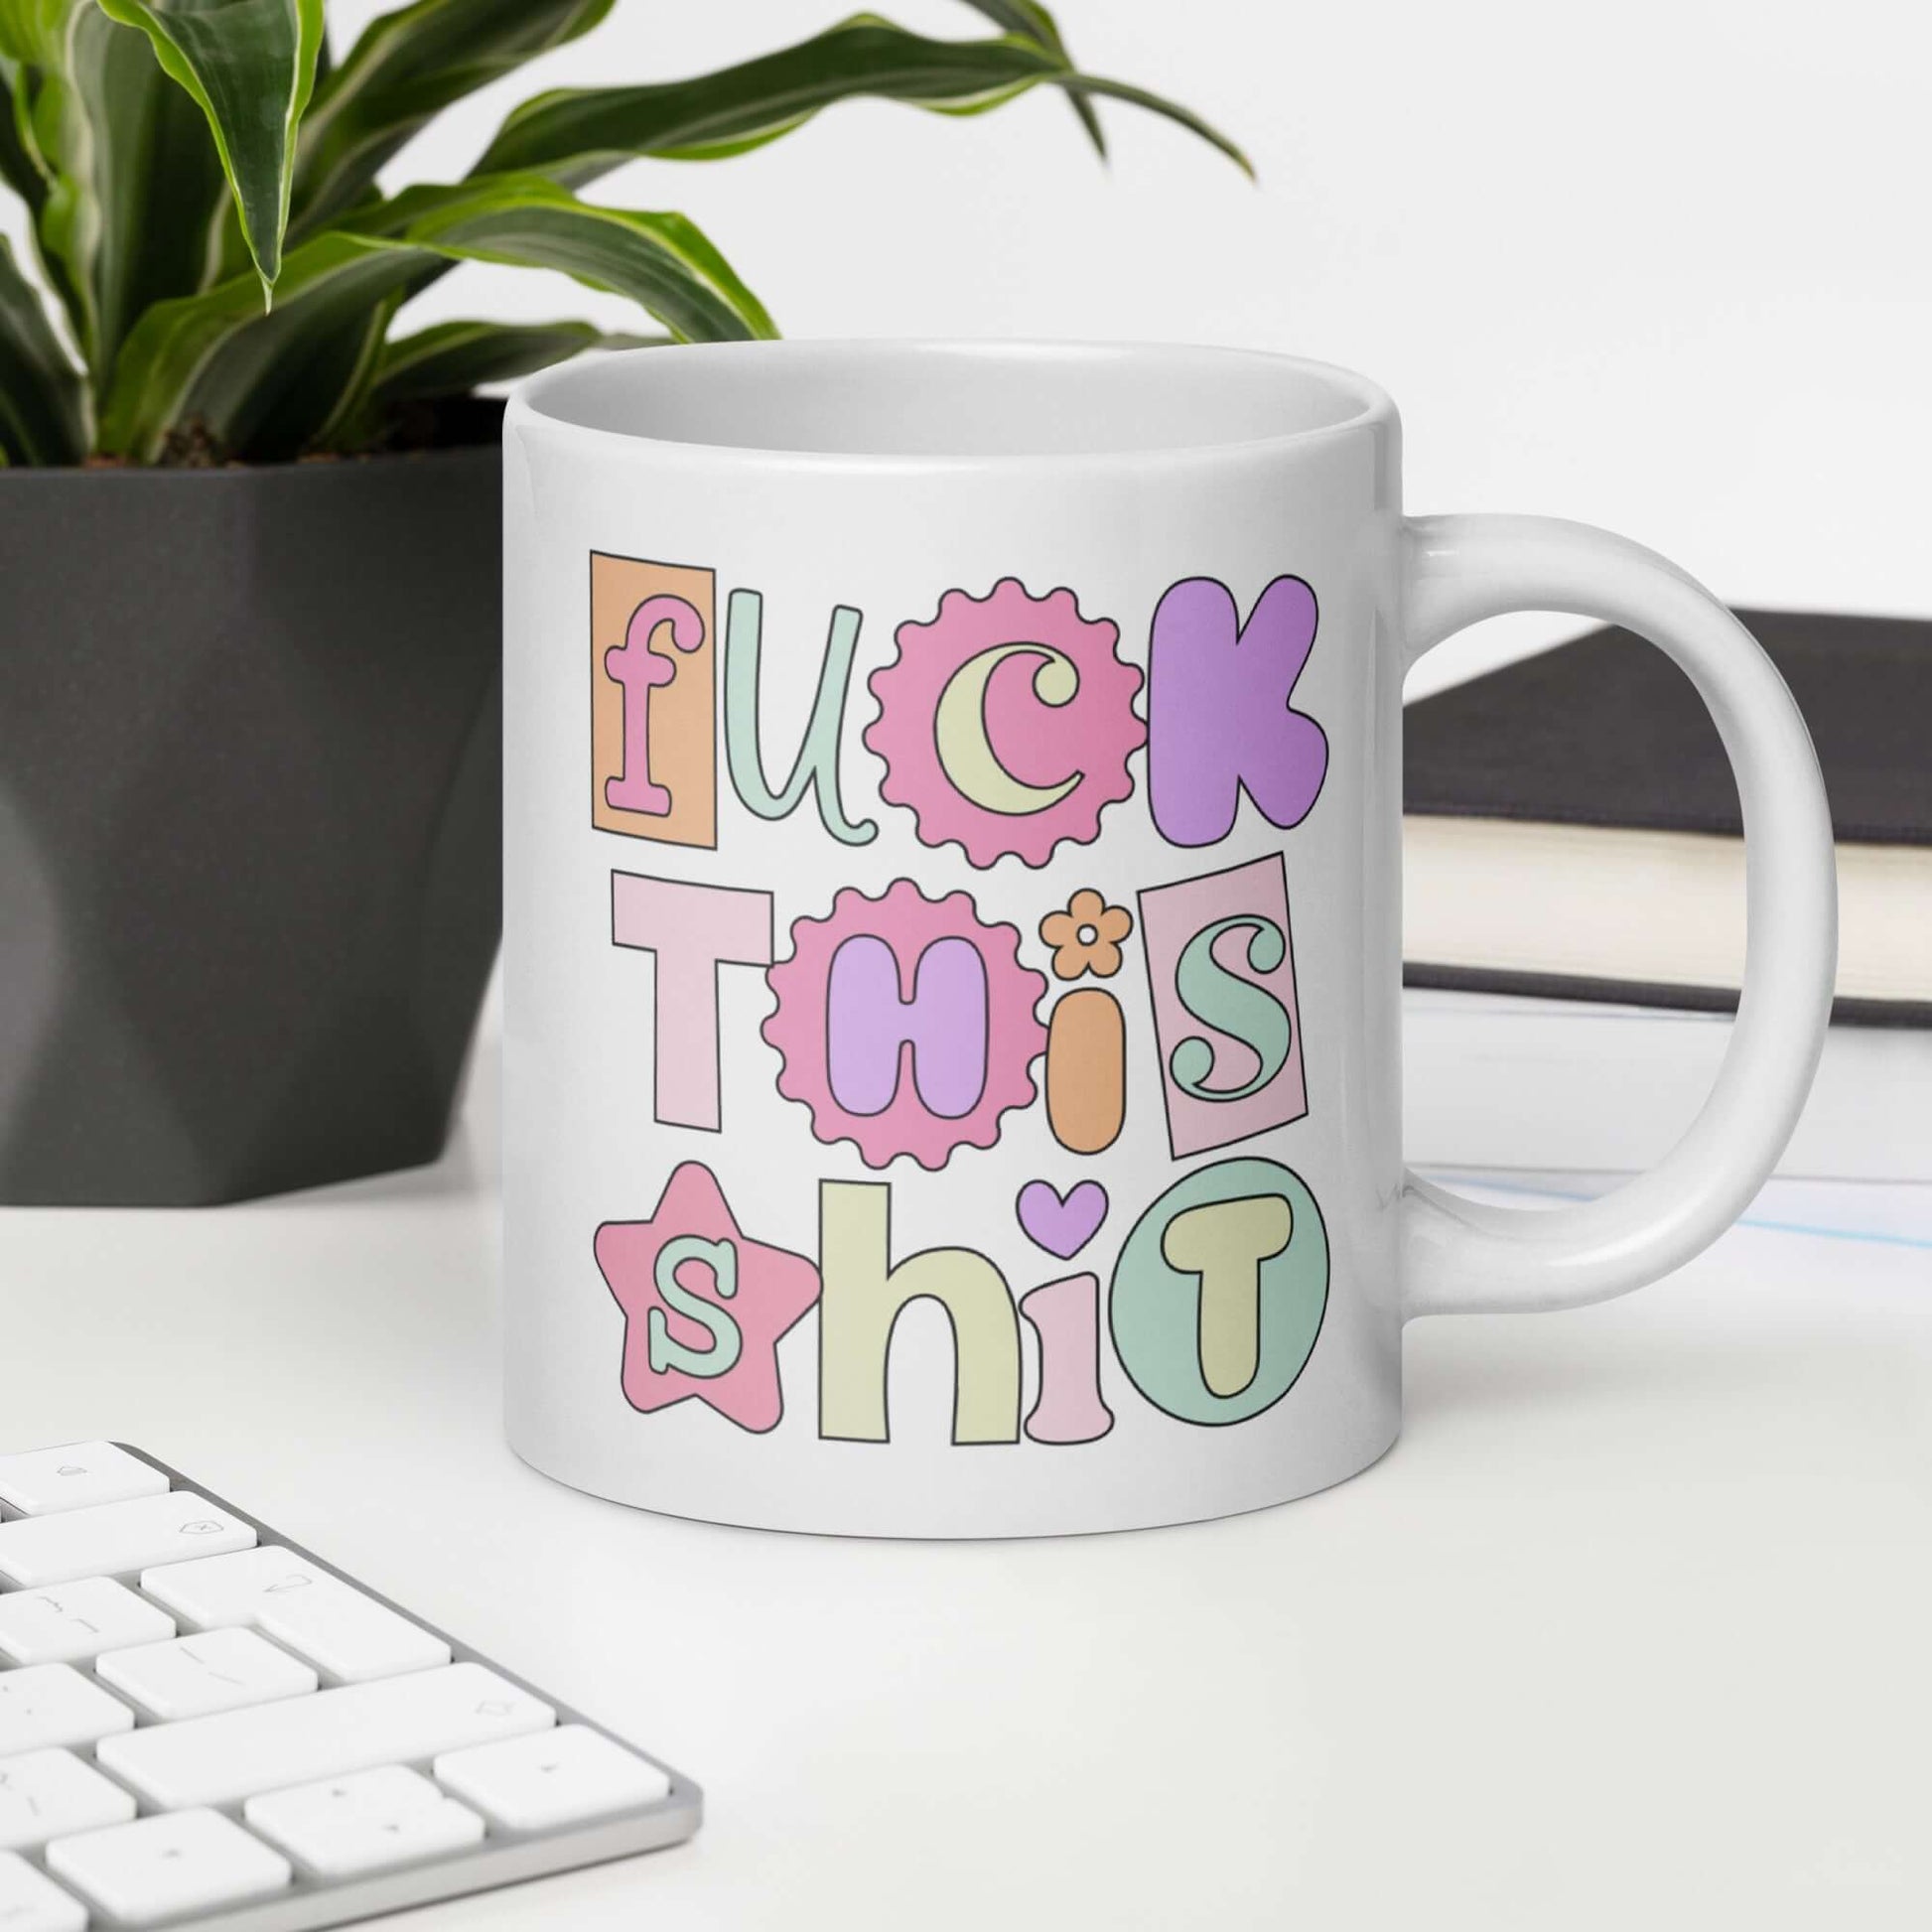 White ceramic coffee mug with colorful pastel font Fuck this shit graphics printed on both sides.